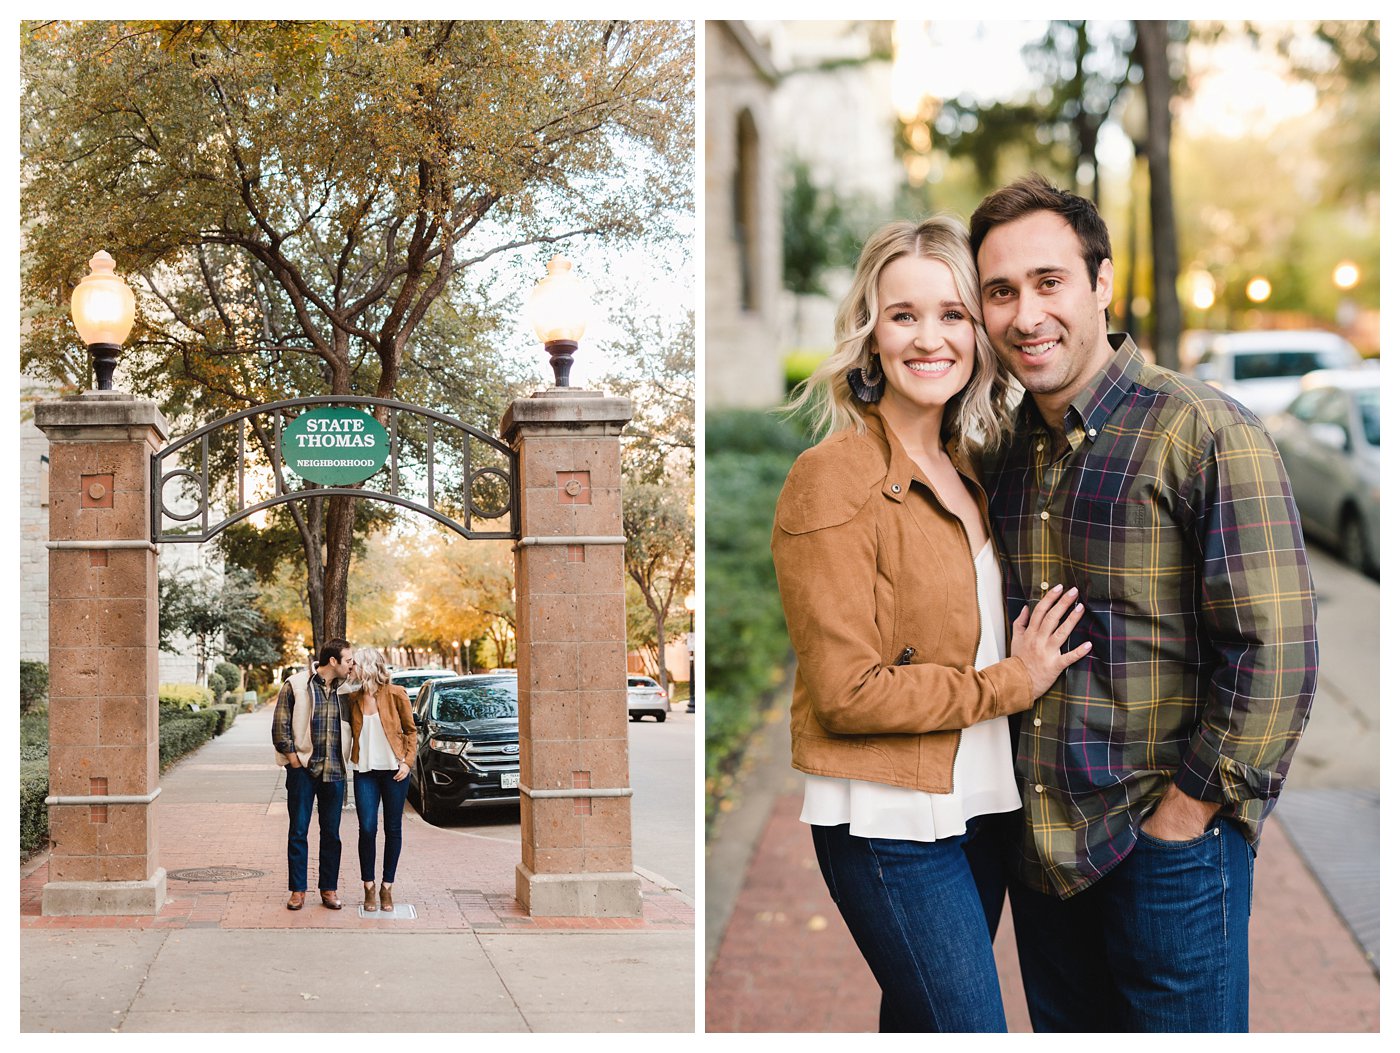 Dallas, Texas Engagement Photos by Amanda and Grady Photography